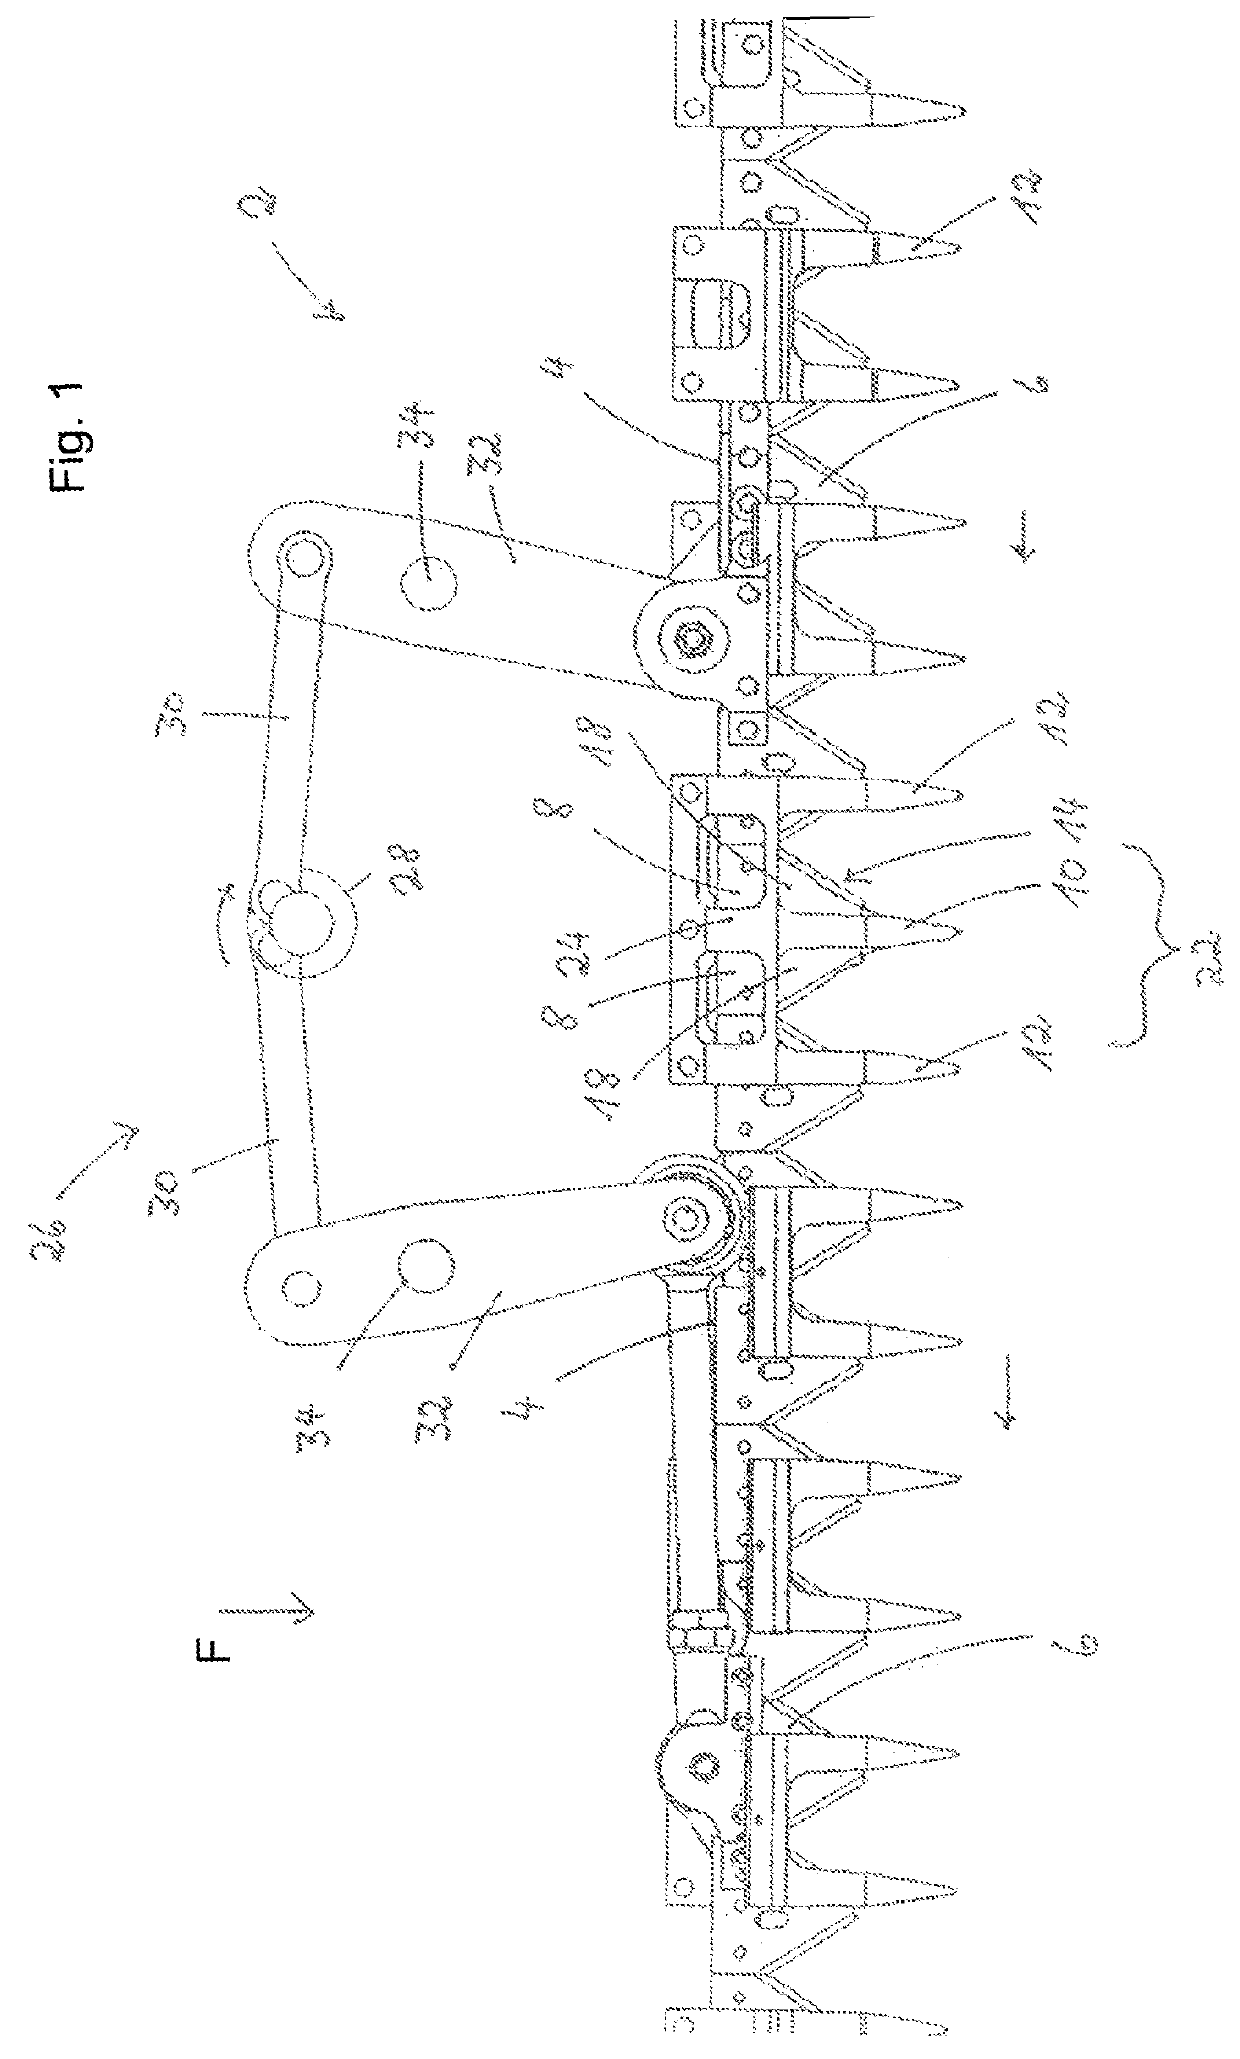 Cutting device for agricultural machines